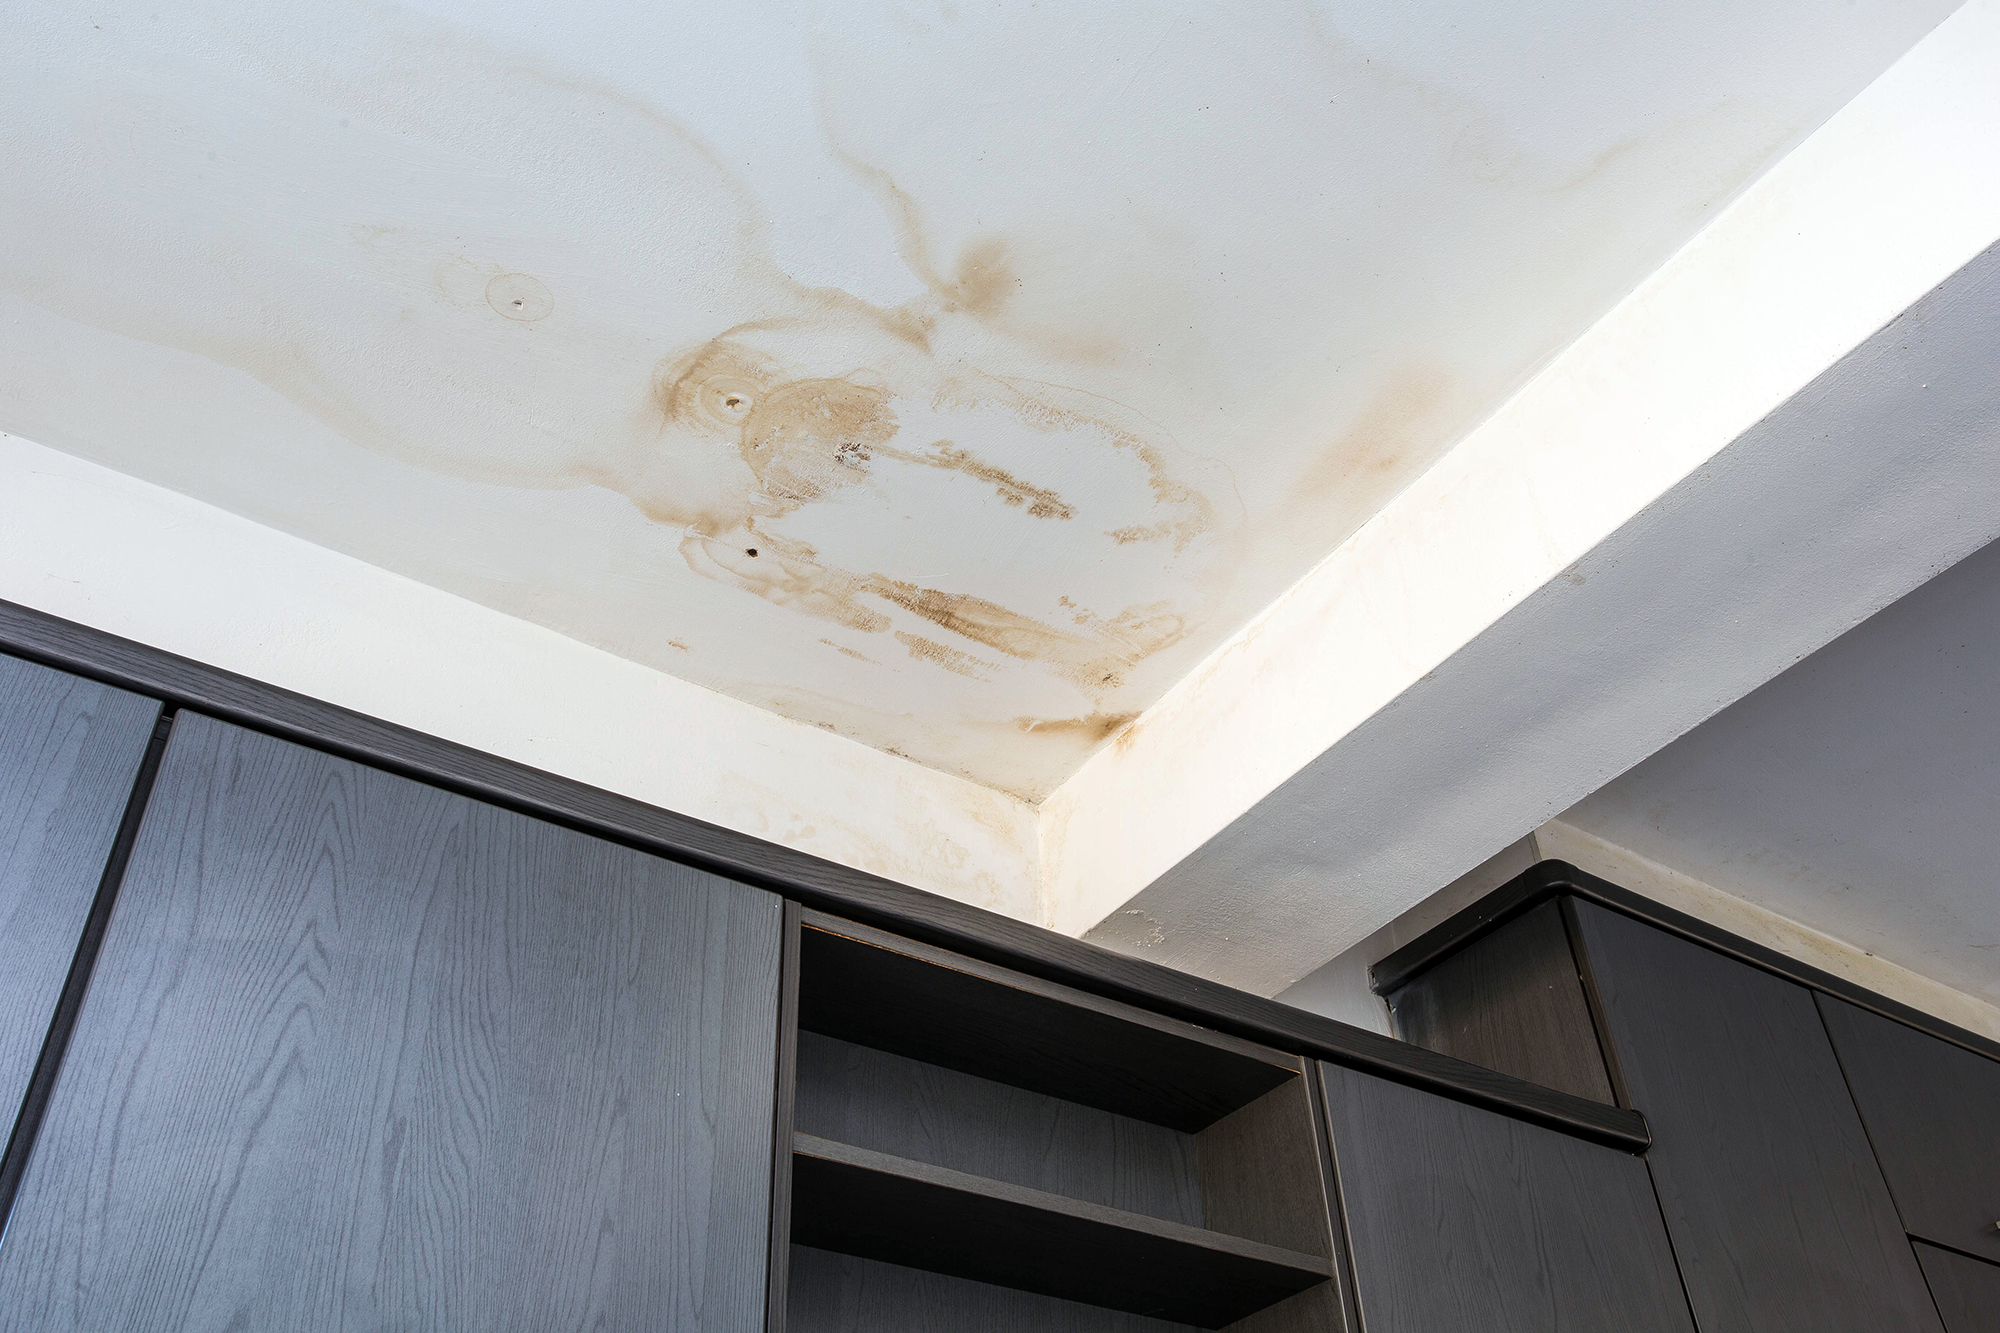 Water damaged ceiling and paint damaged due to water leaks